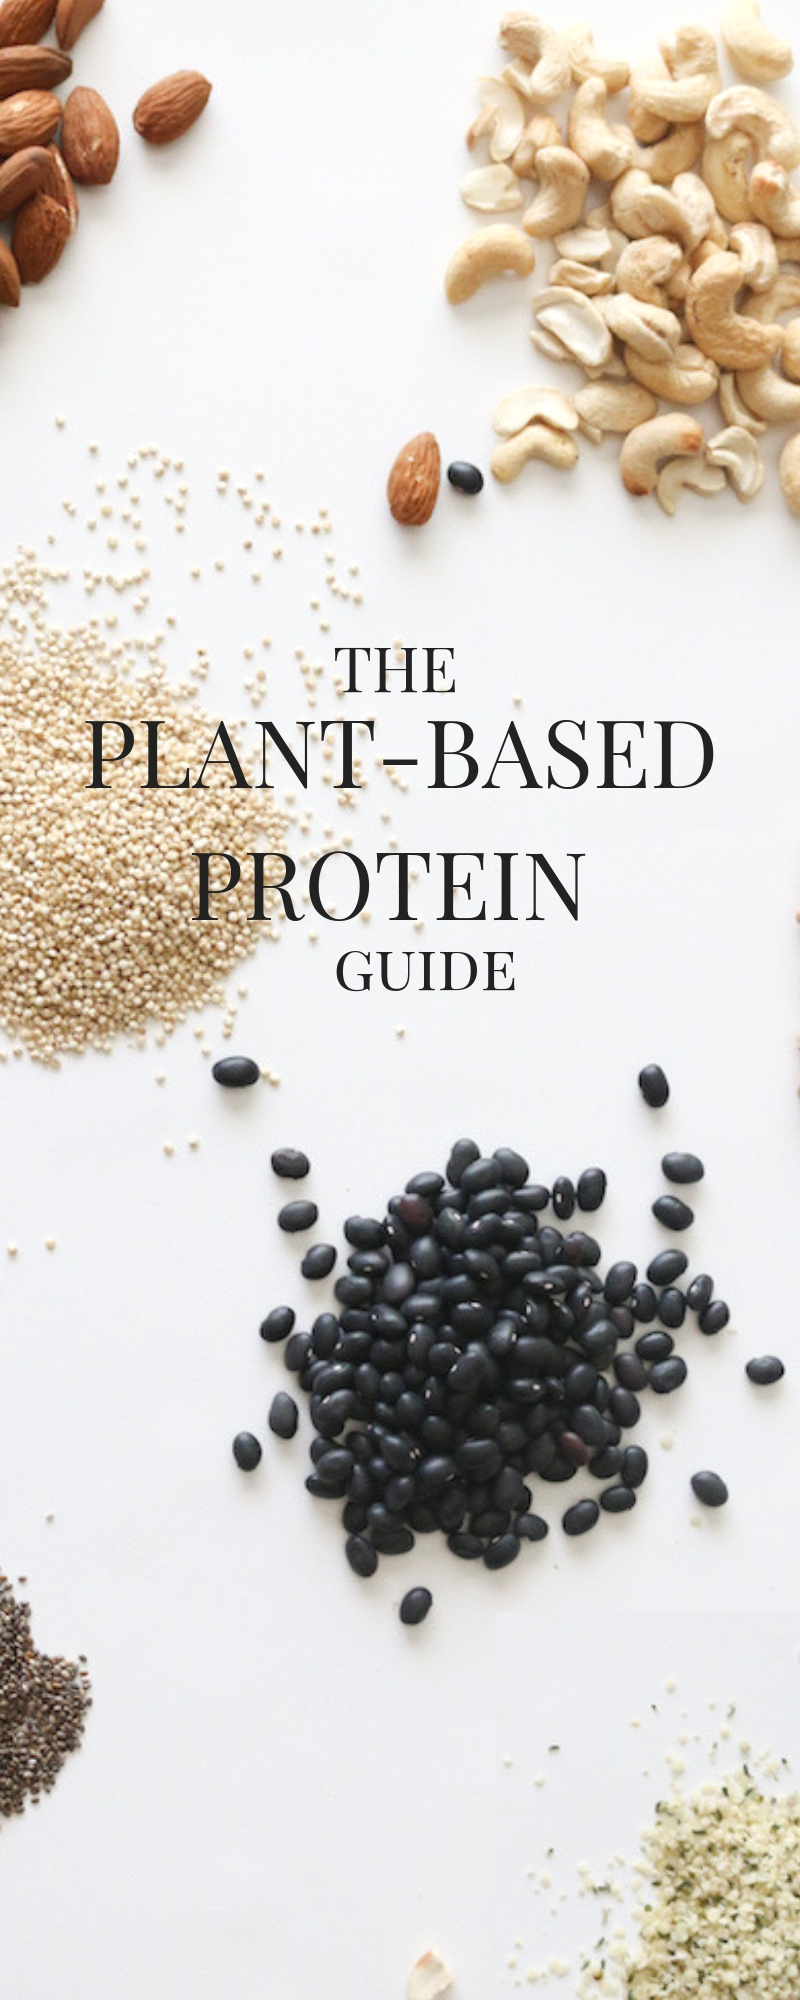 The Plant-based Protein Guide